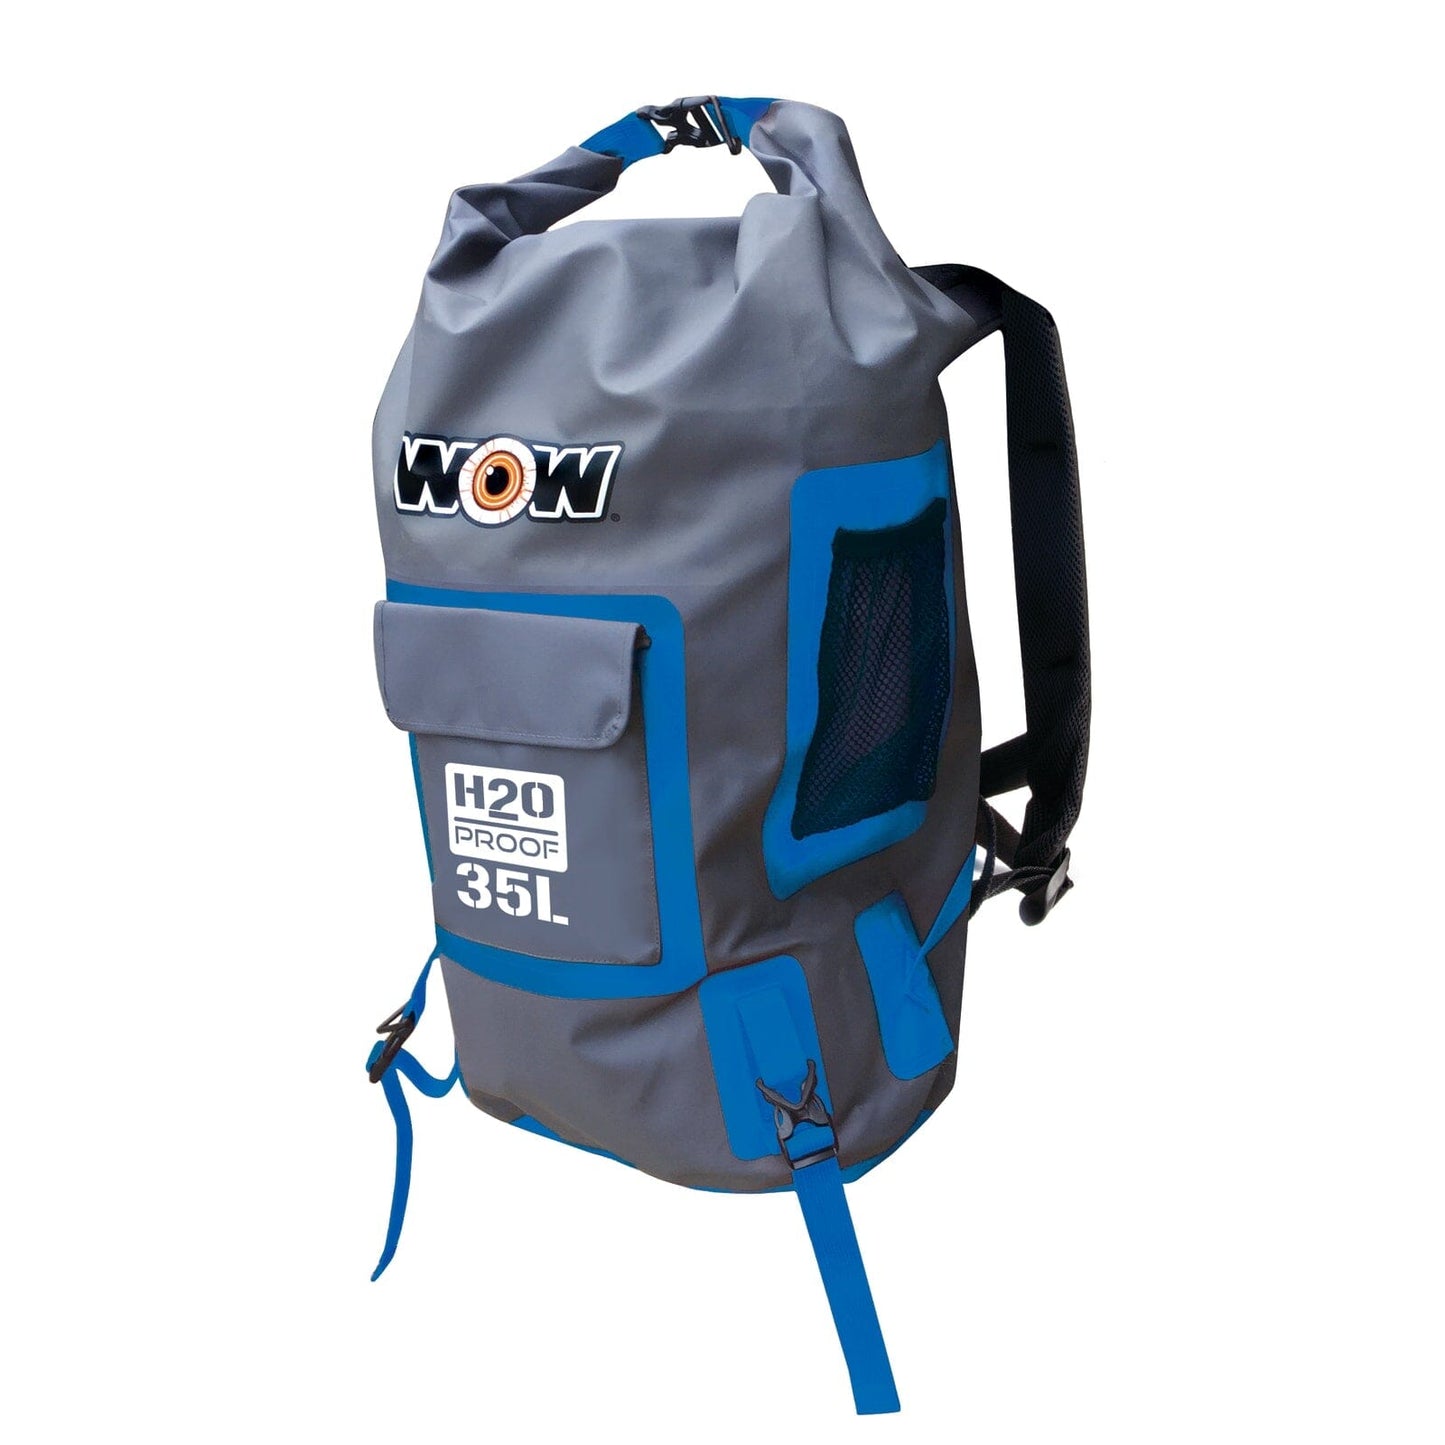 H2O PROOF DRY BACKPACK BLUE